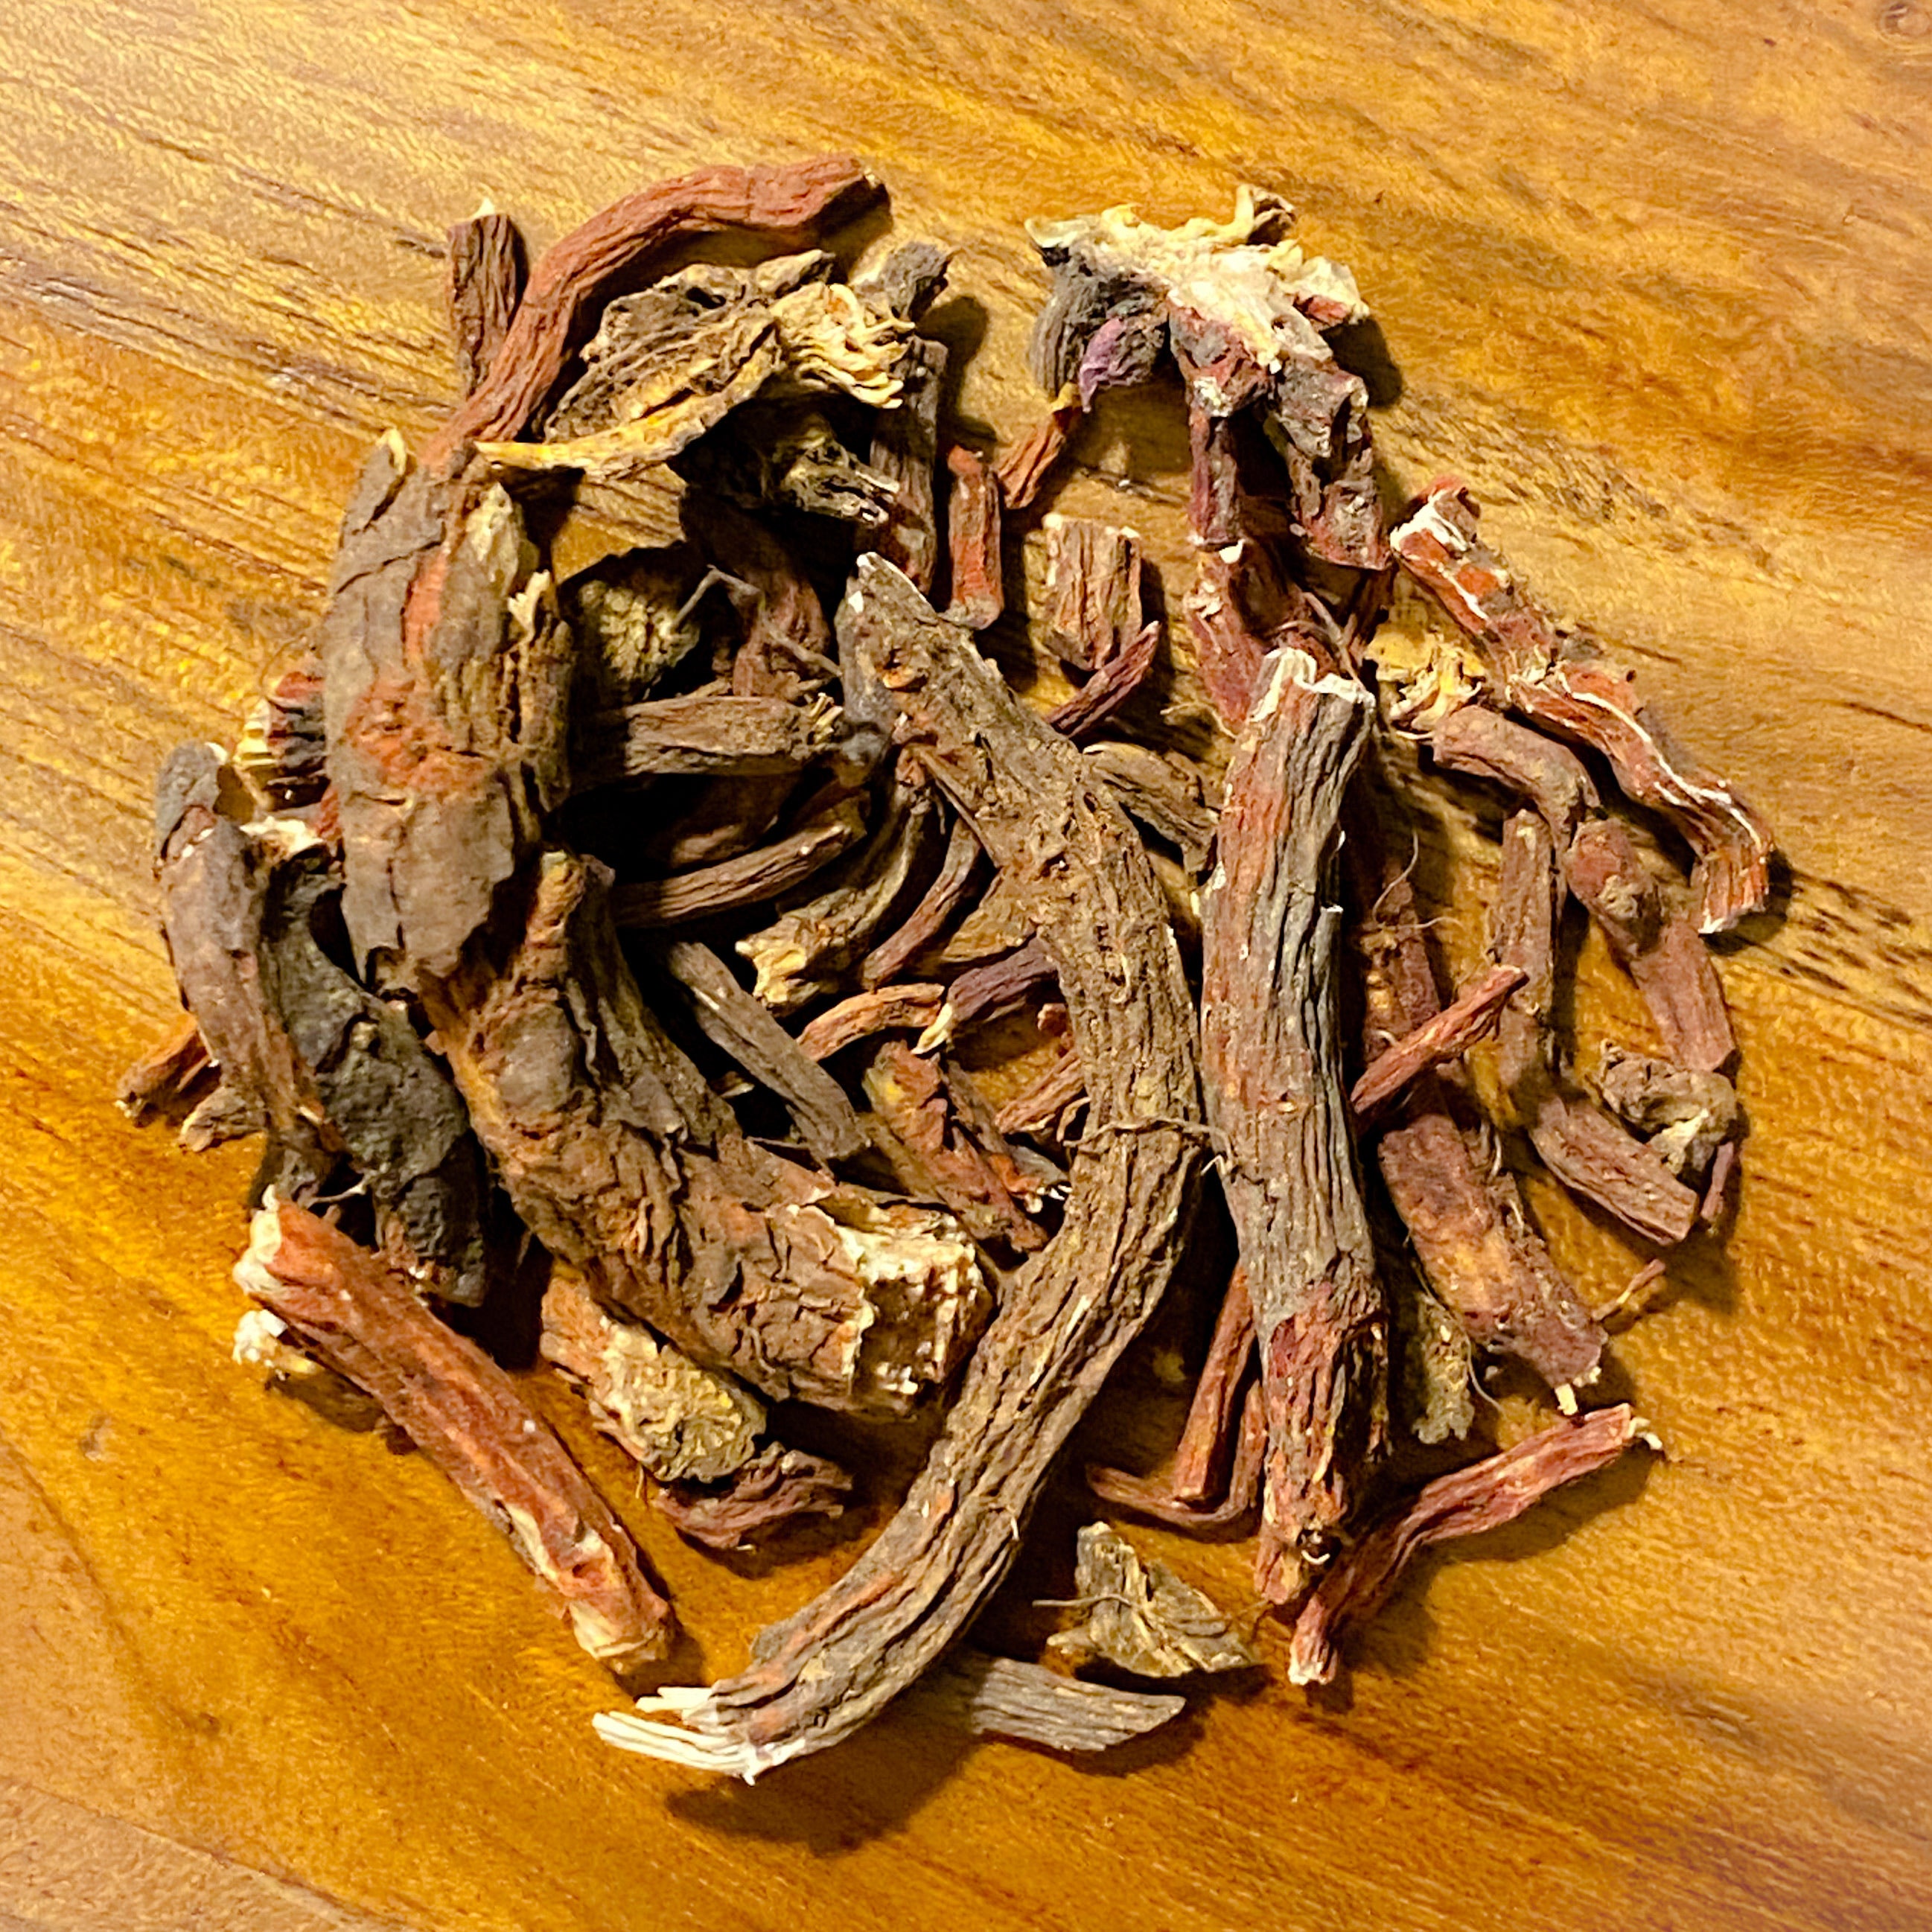 Red Sage Root